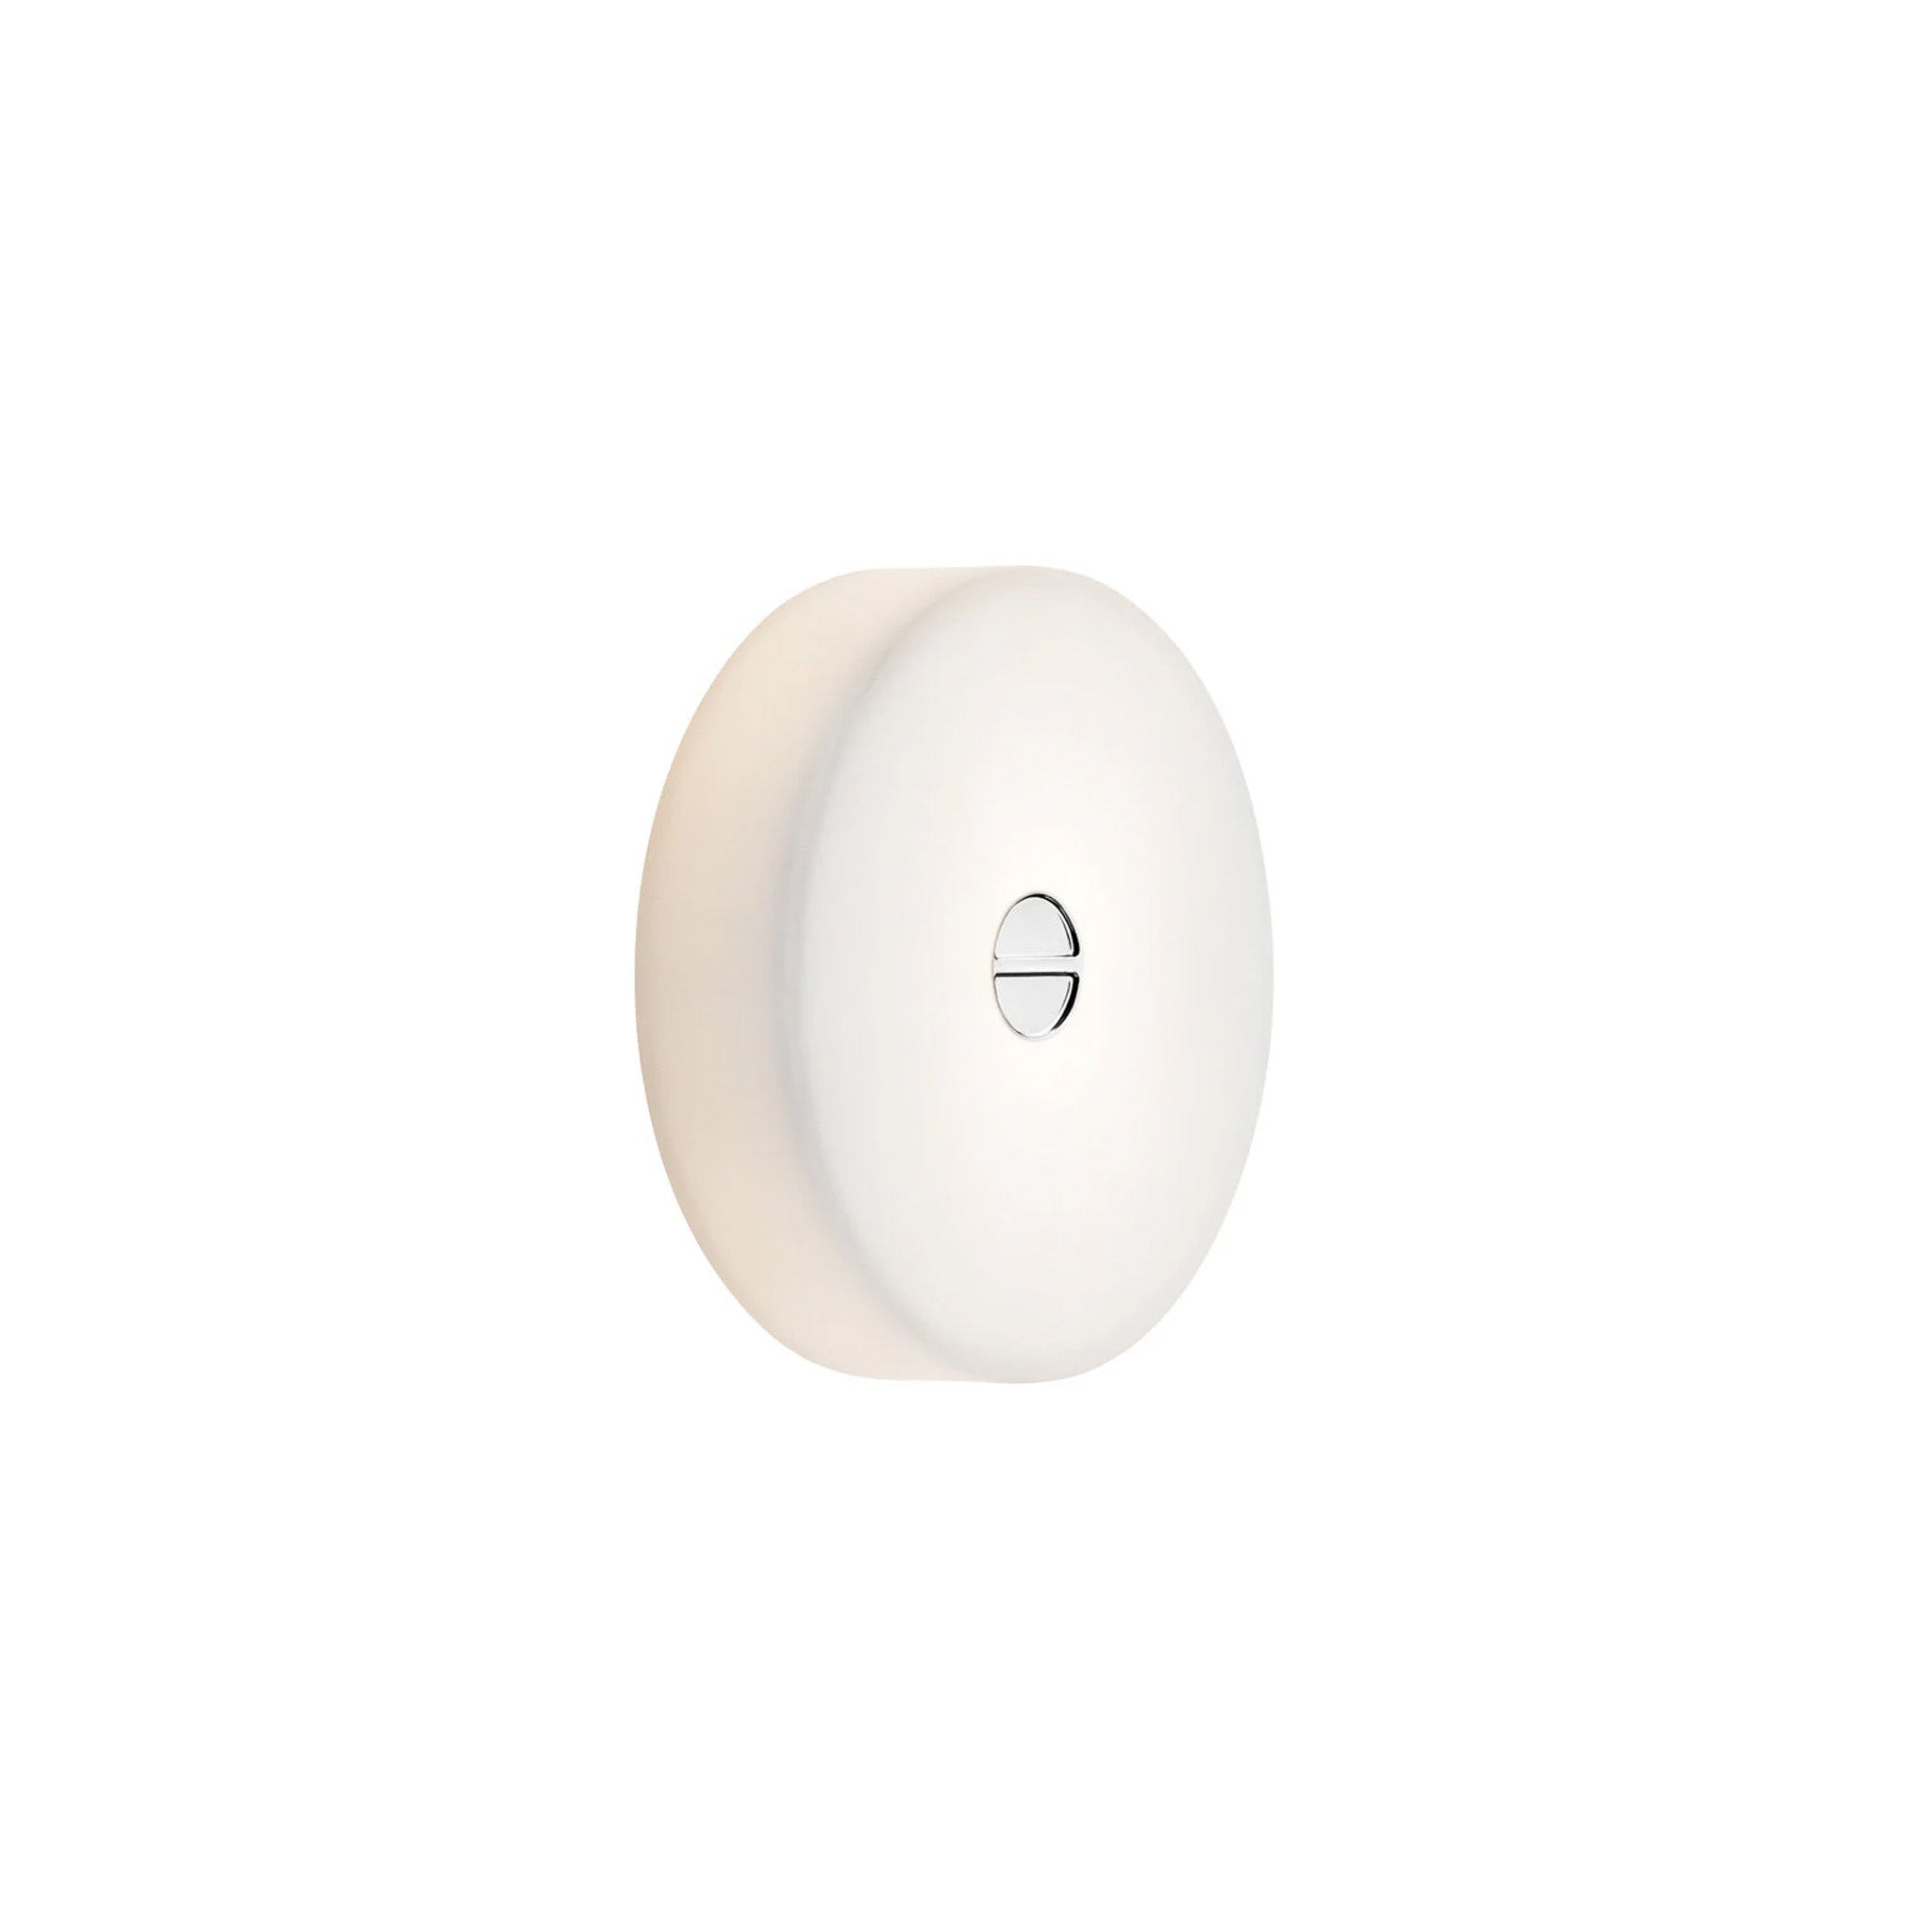 Mini Button Wall Lamp by Piero Lissoni for Flos